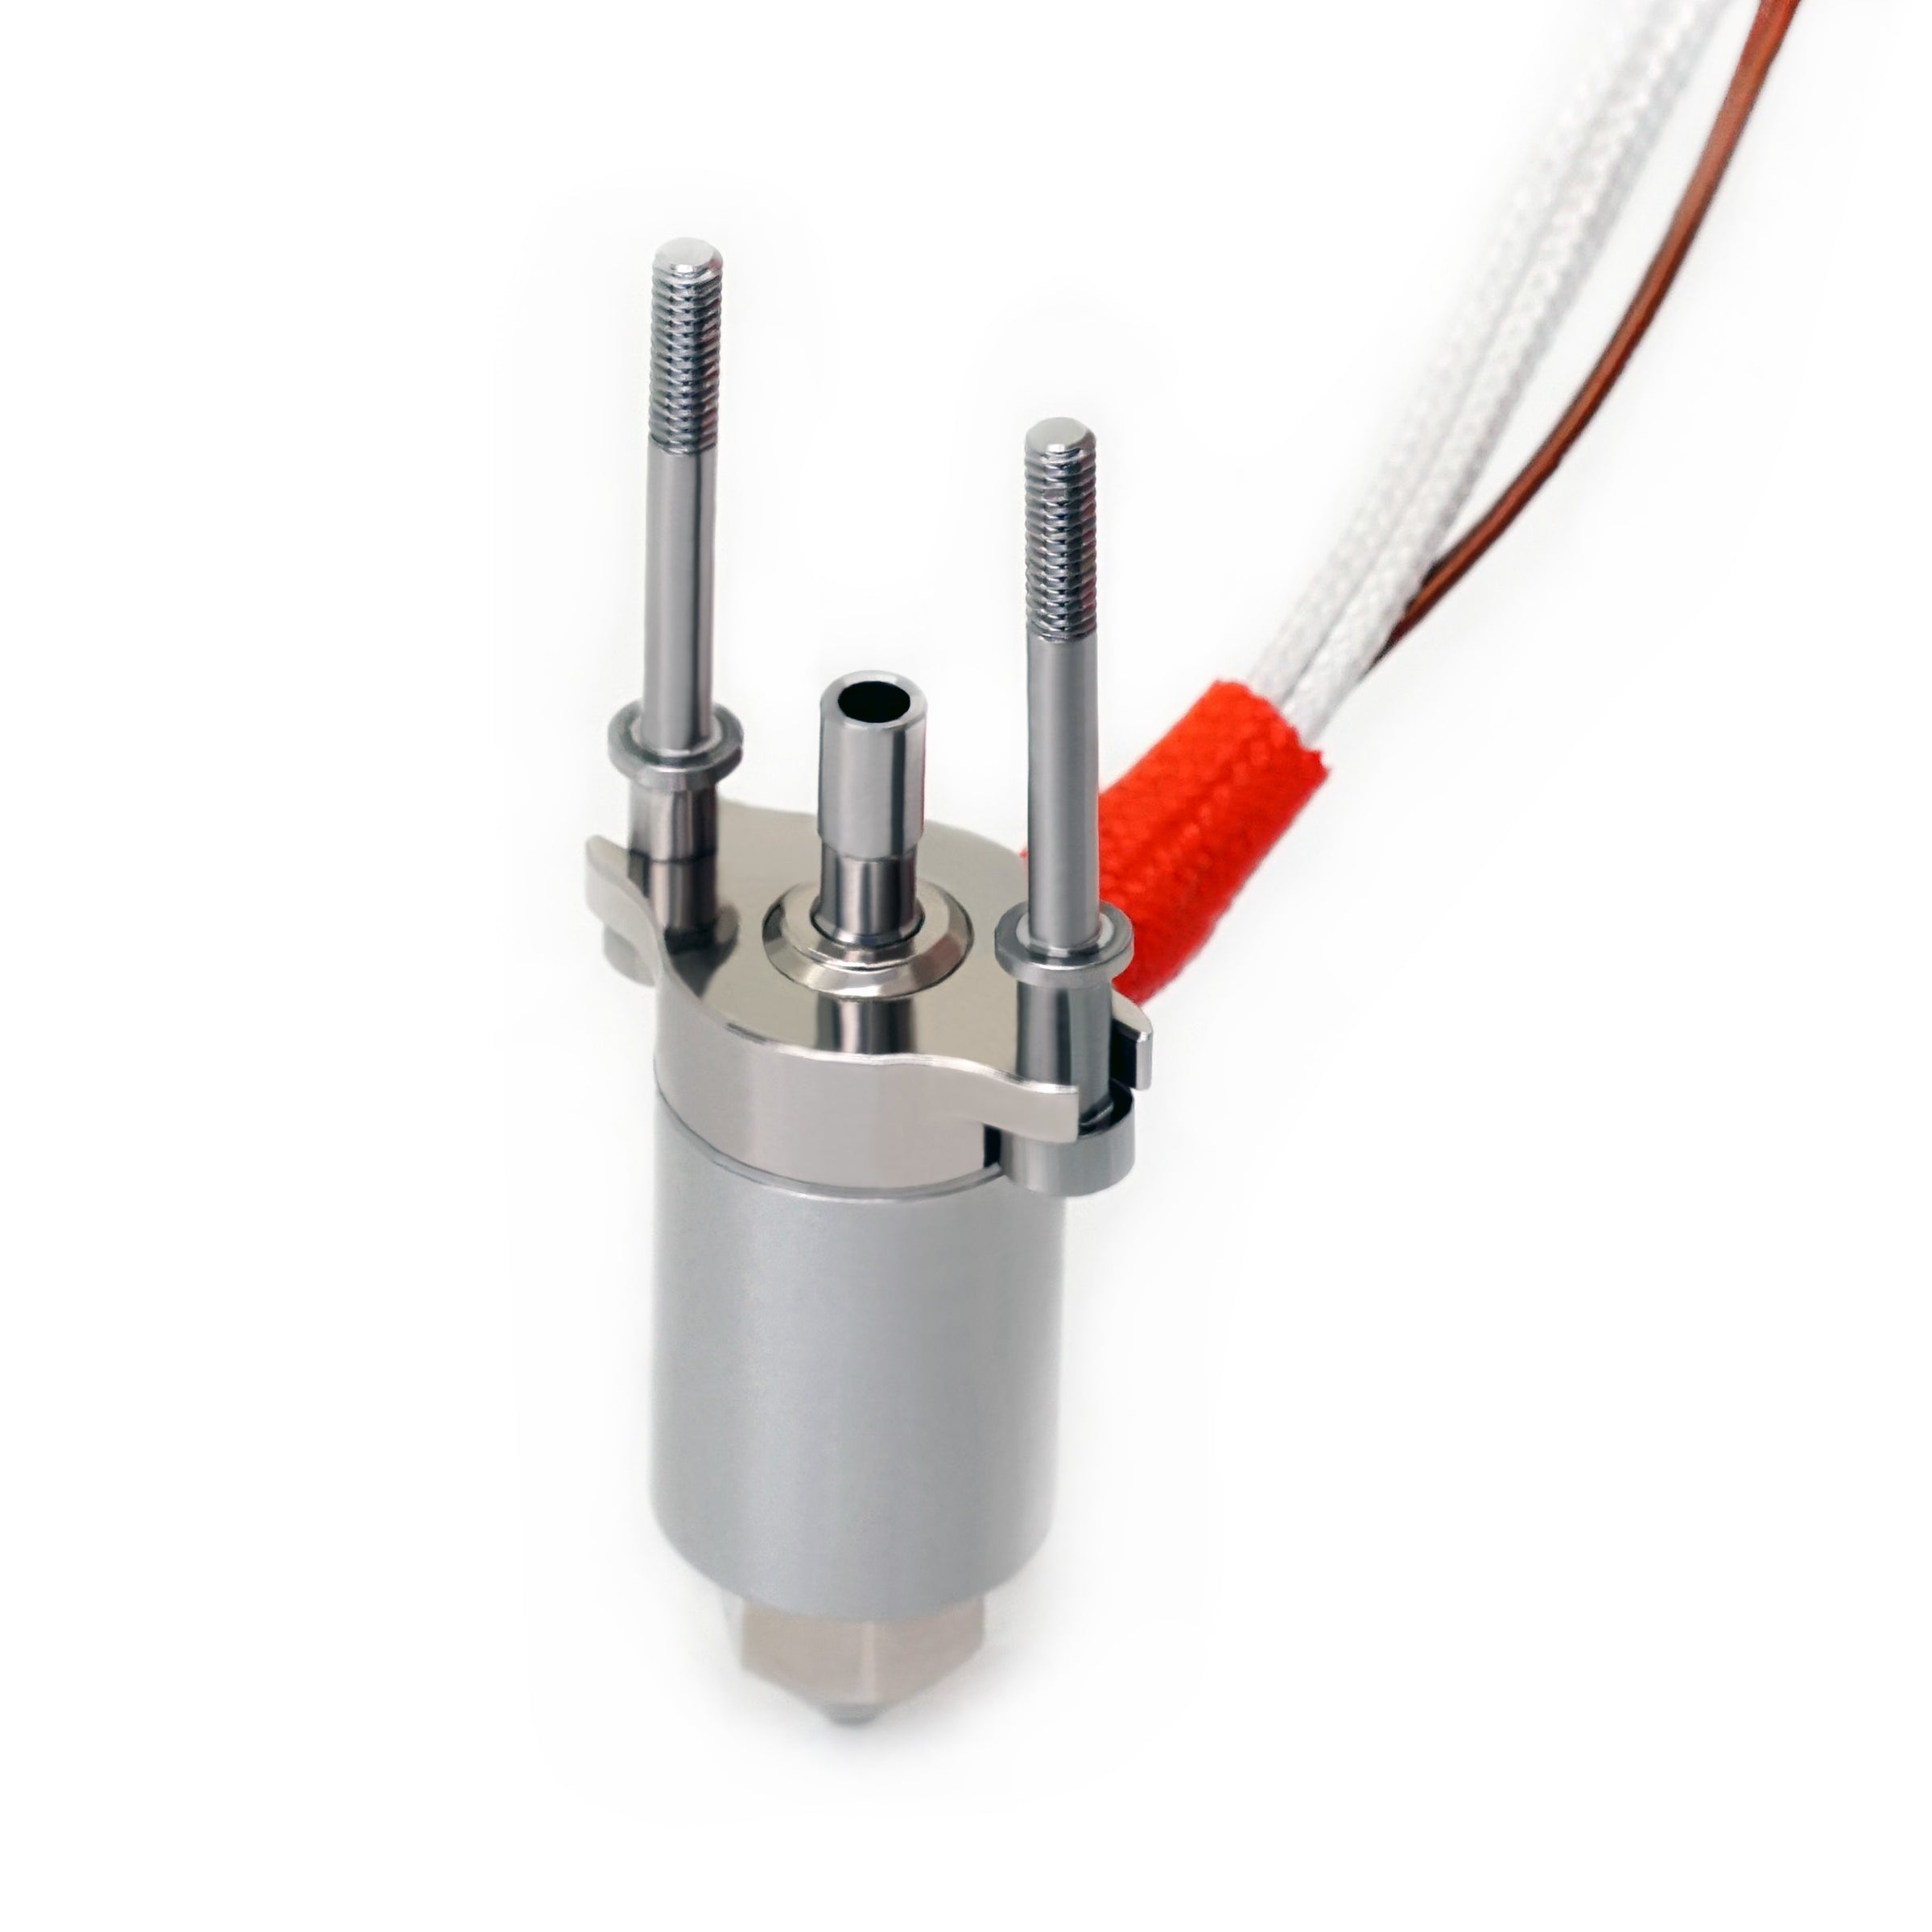 A precision-engineered metal component with two threaded rods, a central cylinder, and attached insulated wires against a white background. This Micro Swiss Micro Swiss FlowTech Hotend for Creality K1 appears to be part of a mechanical or electrical device, possibly incorporating a leak-proof nozzle for enhanced performance.